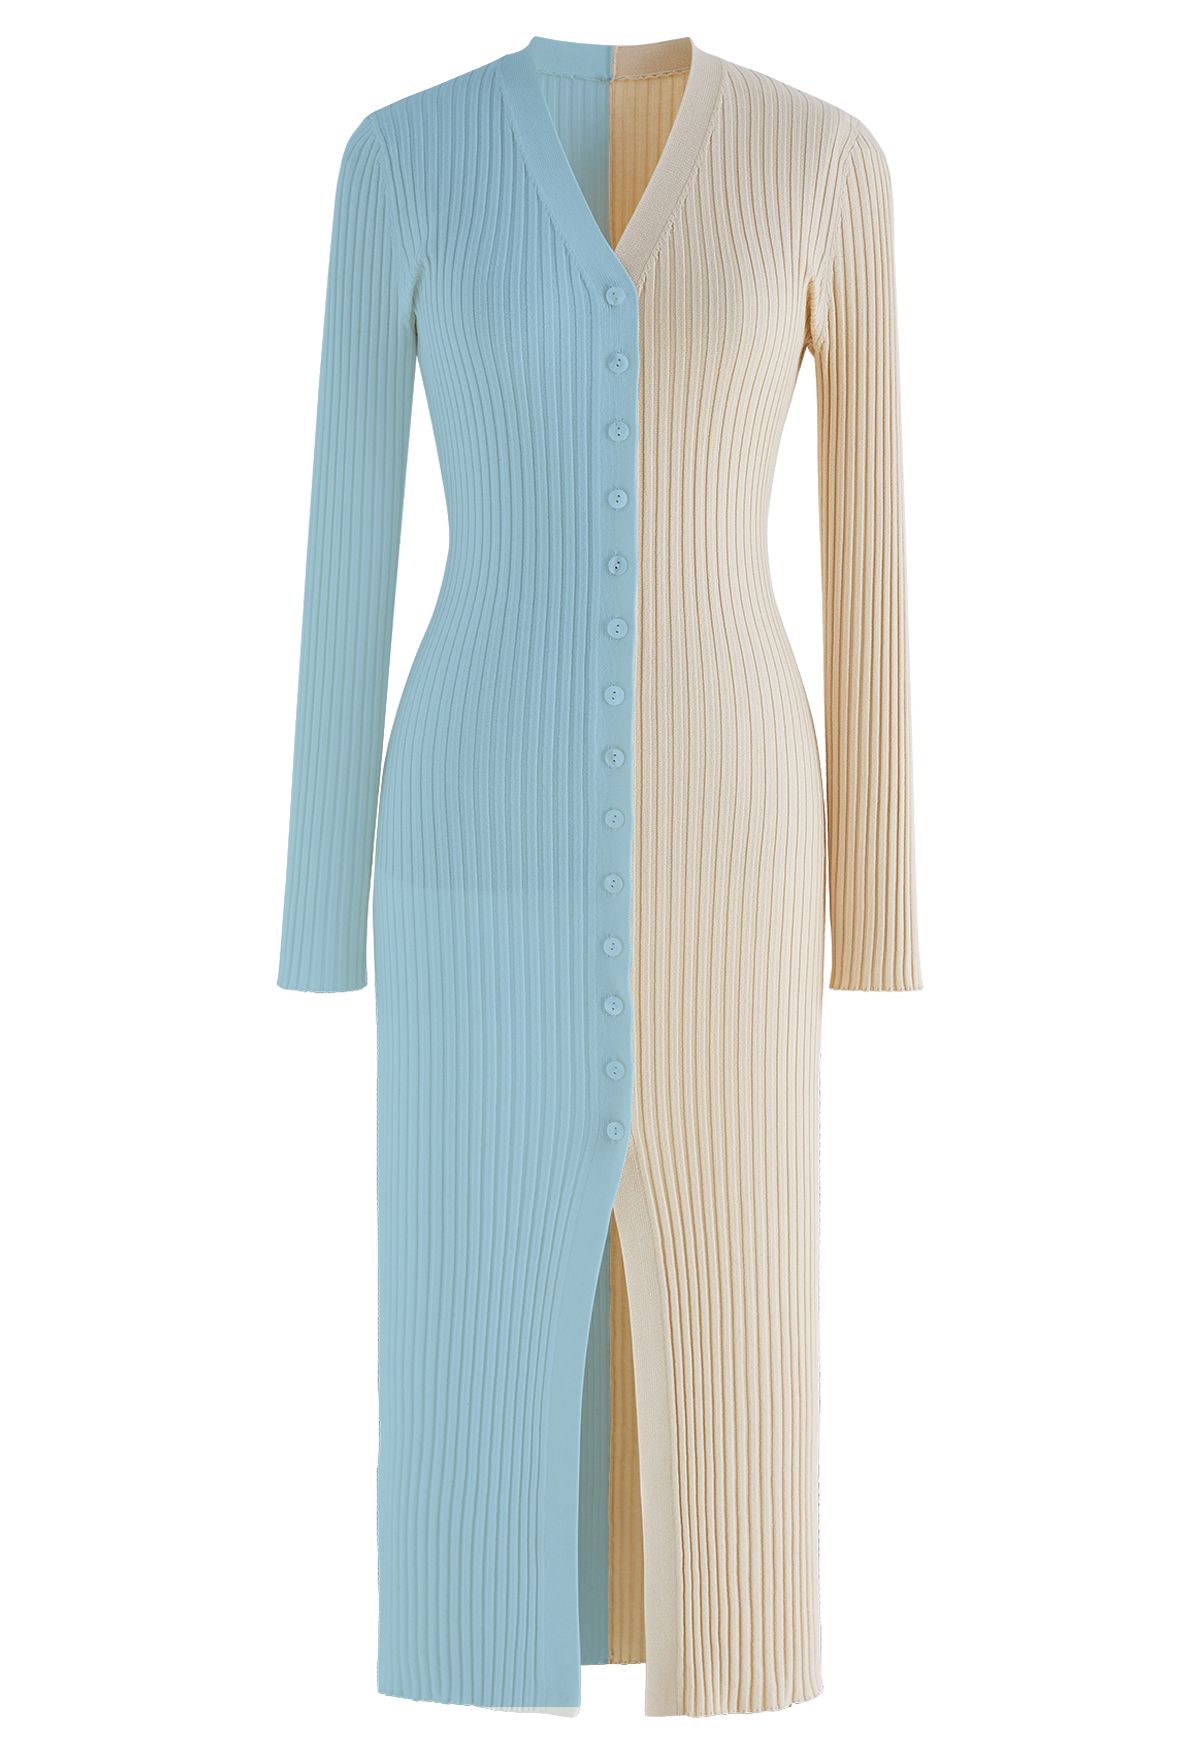 Button Down Two-Tone Spliced Bodycon Knit Dress in Baby Blue